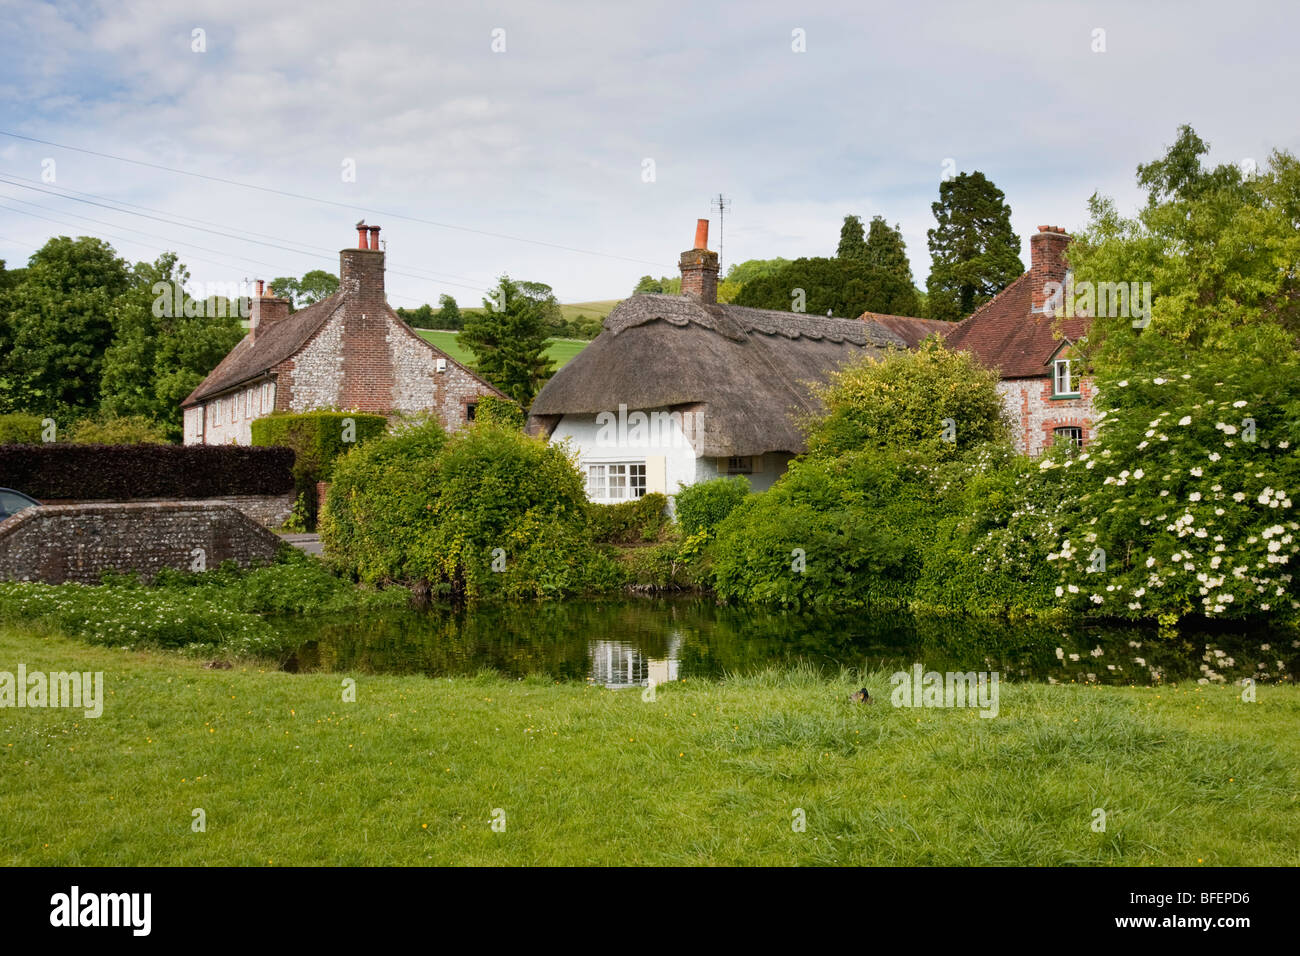 Village pond and thatched cottages in West Sussex, England Stock Photo